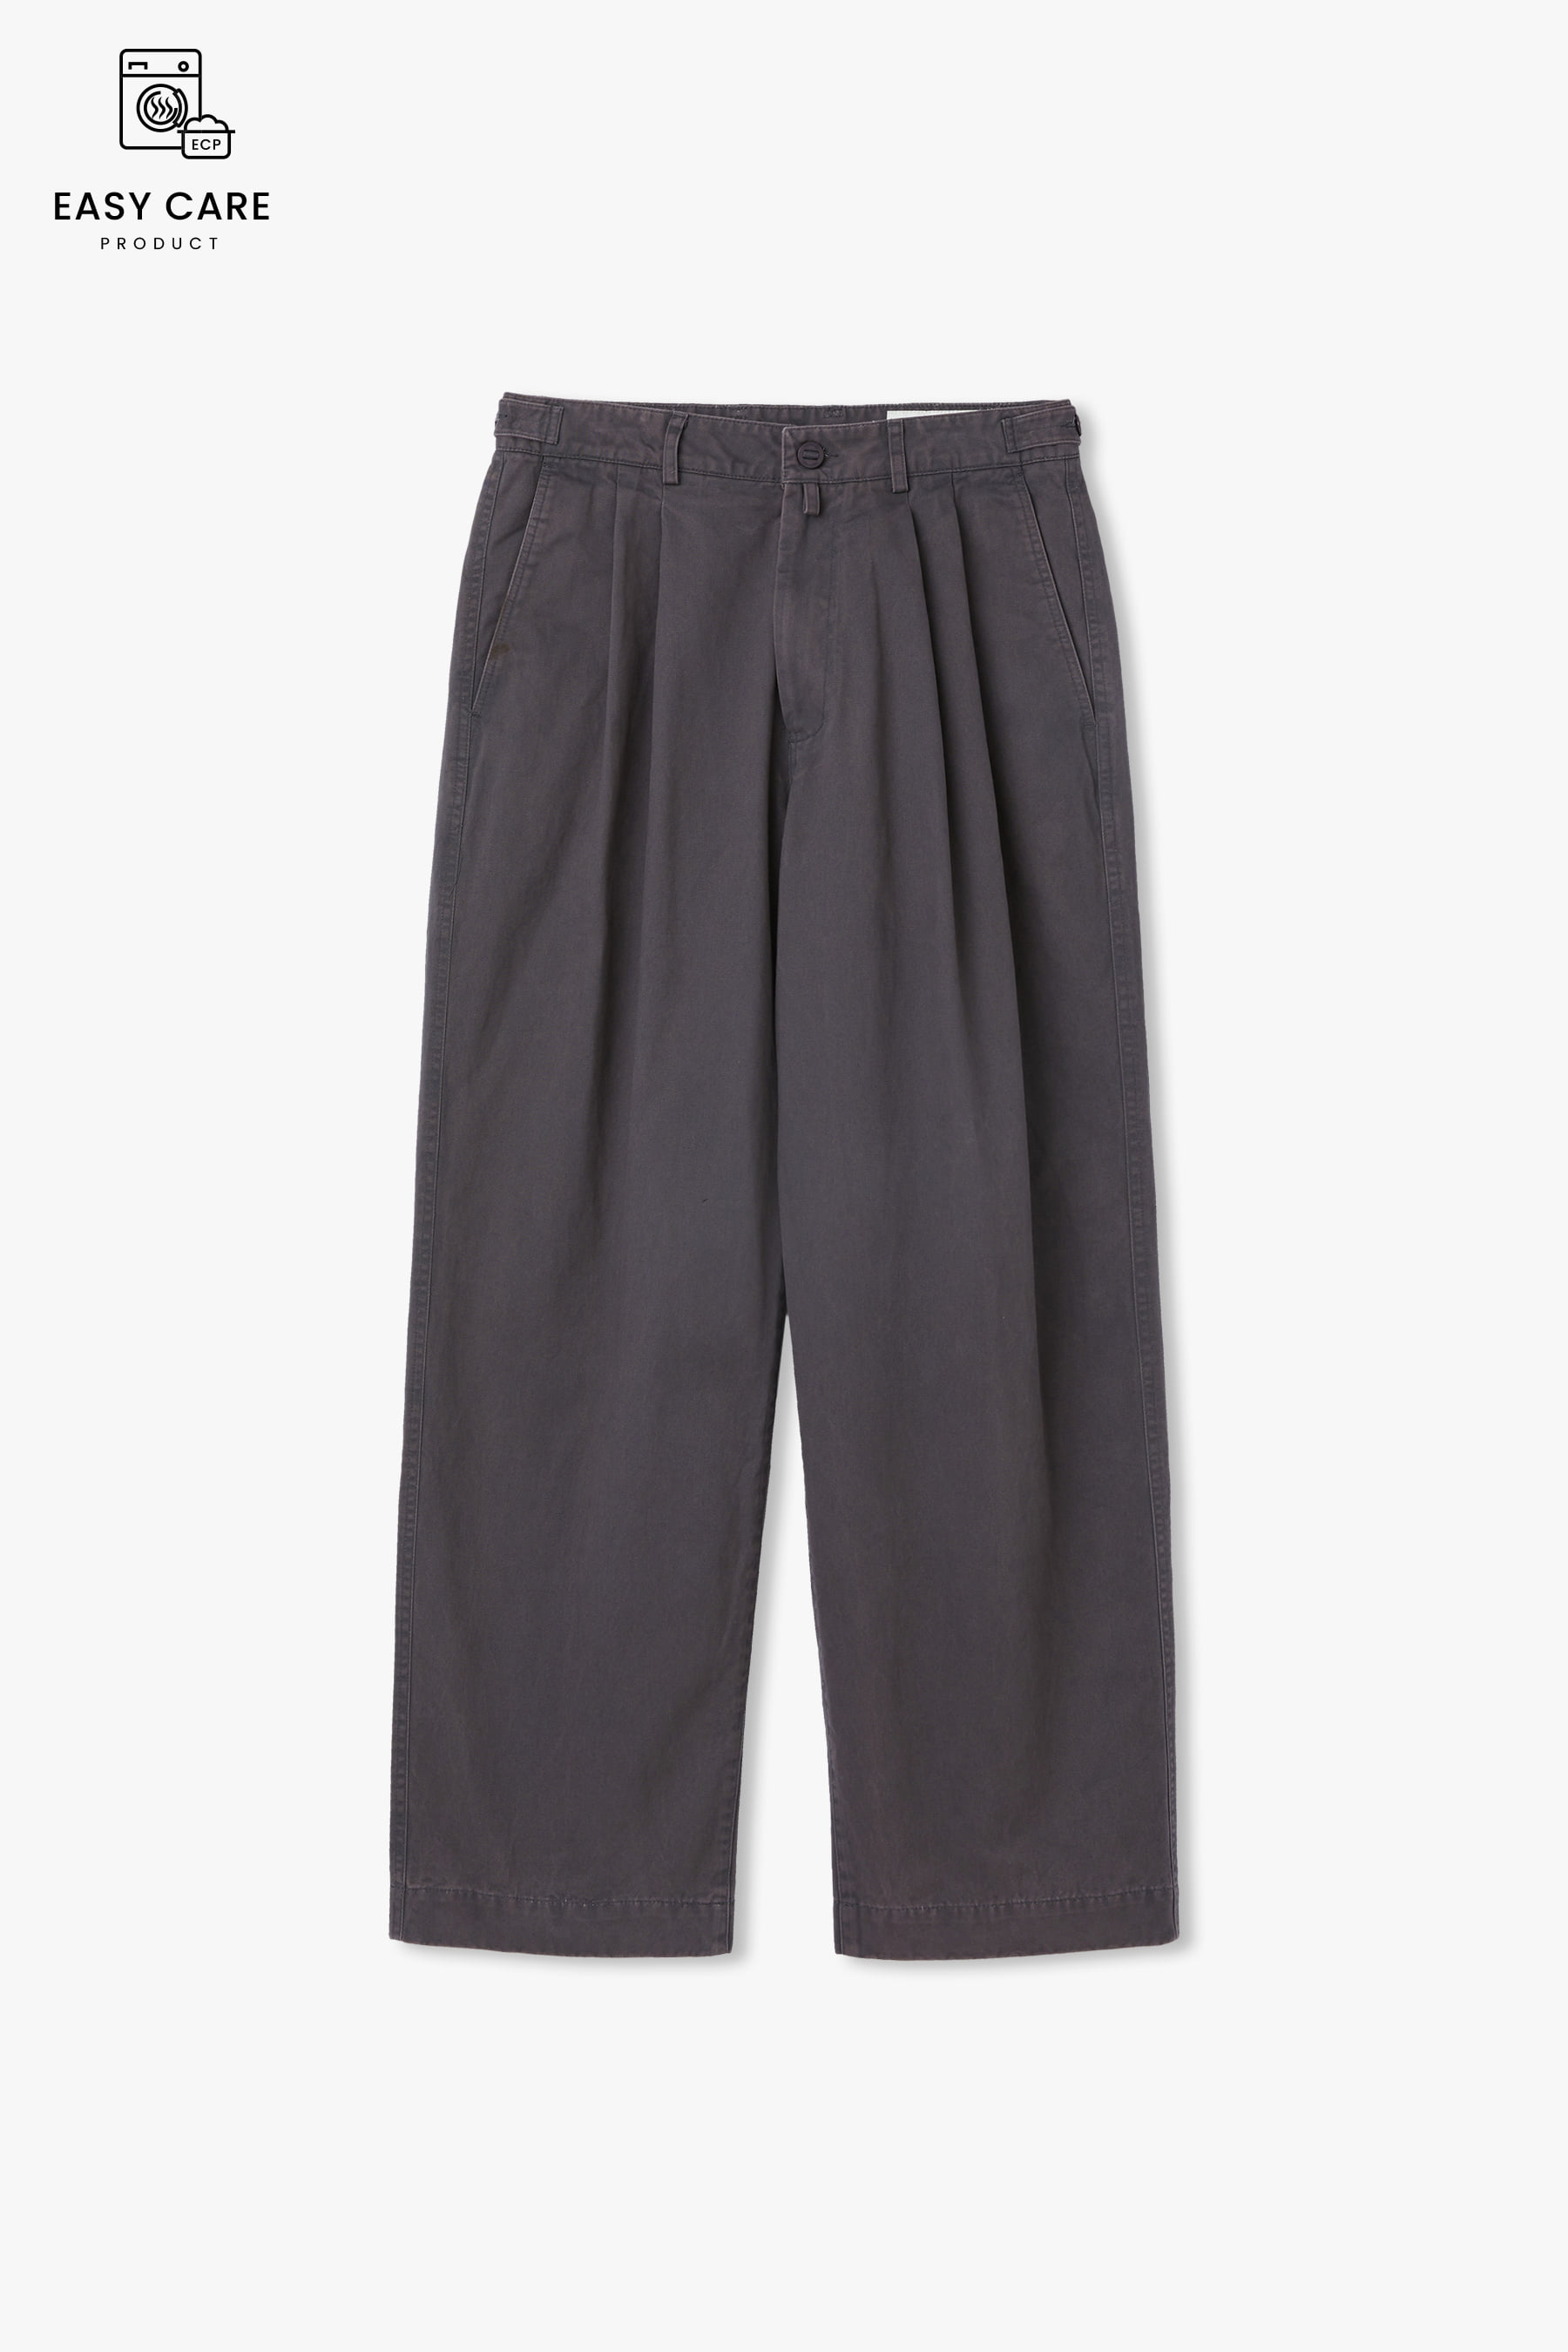 DUSTY GRAY SOFT FLUFF COTTON YRS Y-550 WASHED WIDE CHINO PANTS (ECP GARMENT PROCESS)